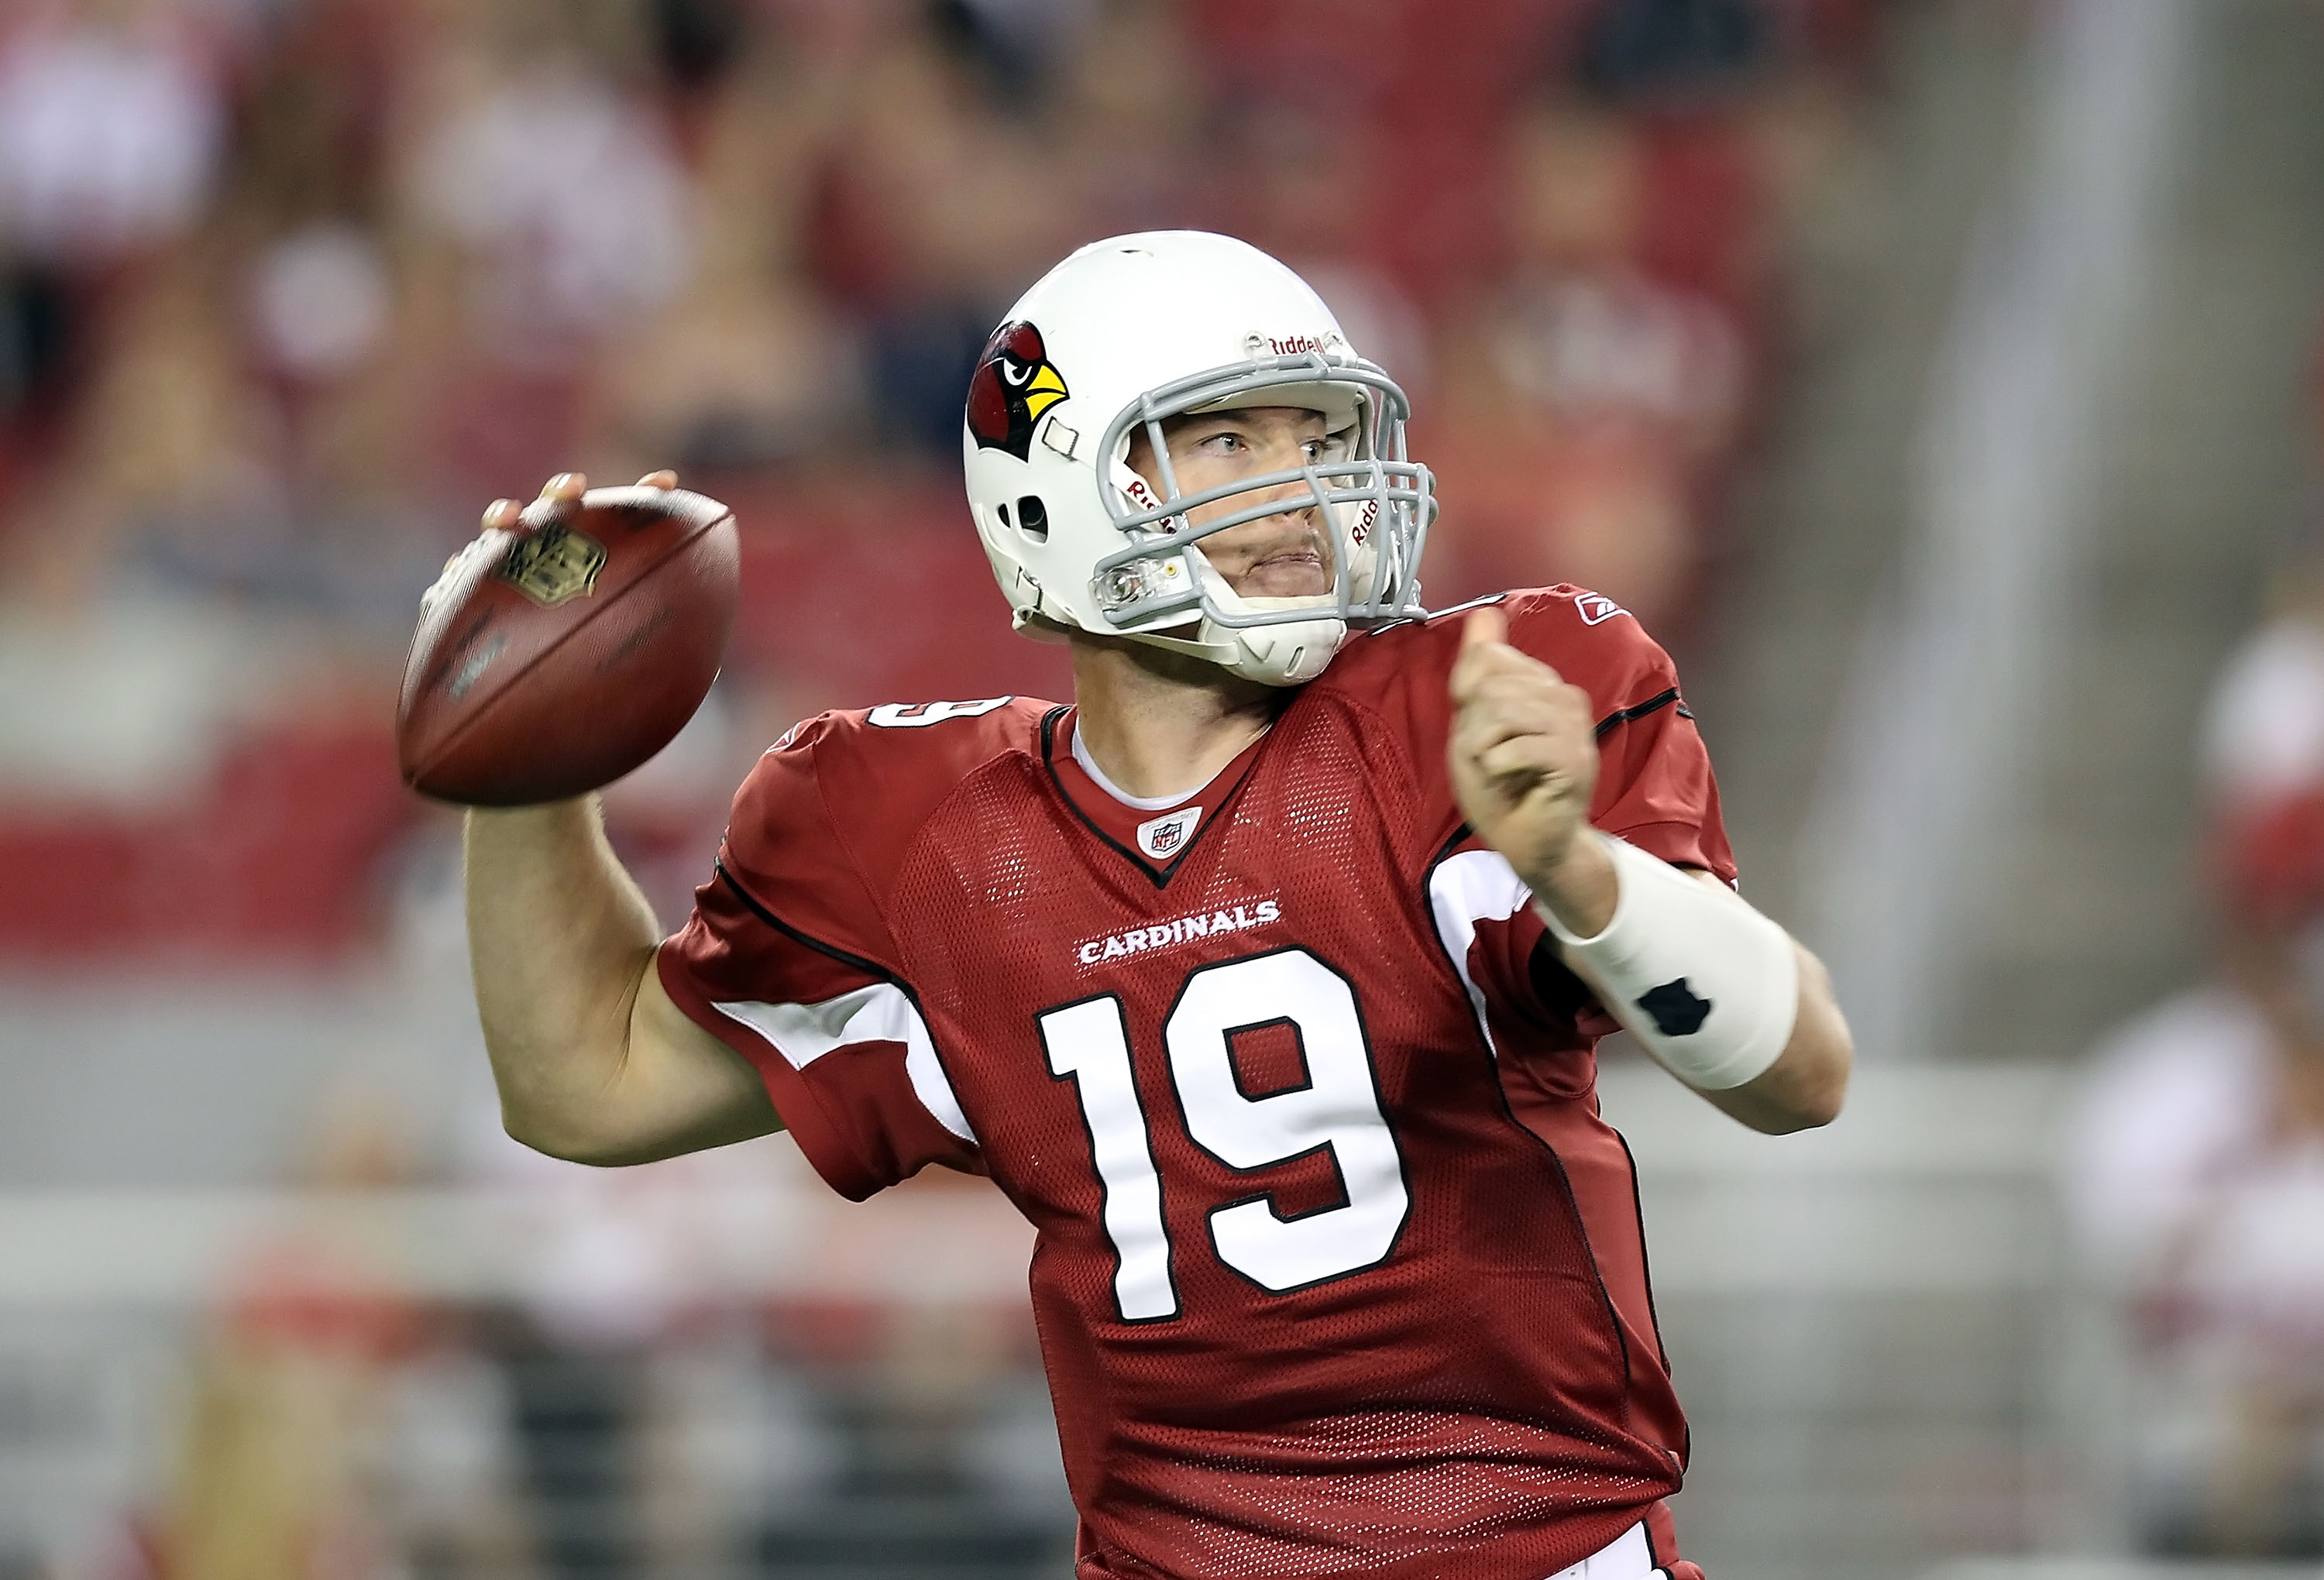 GLENDALE, AZ - AUGUST 14:  Quarterback John Skelton #19 of the Arizona Cardinals drops back to pass during preseason NFL game against the Houston Texans at the University of Phoenix Stadium on August 14, 2010 in Glendale, Arizona.  The Cardinals defeated 